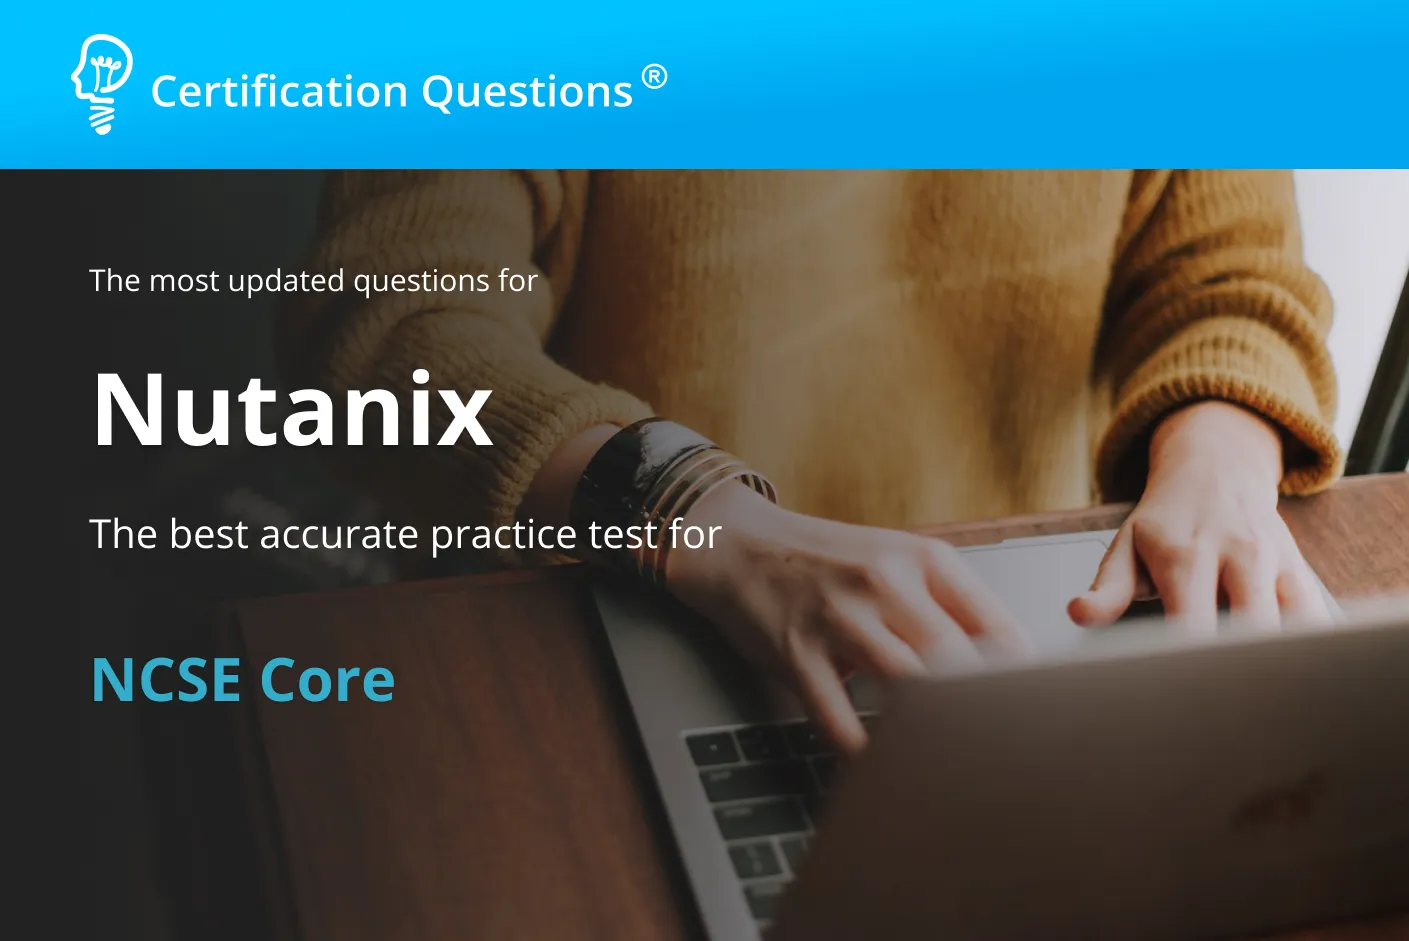 Here is the image for the Nutanix NCSE MCI Exam in the United States of America